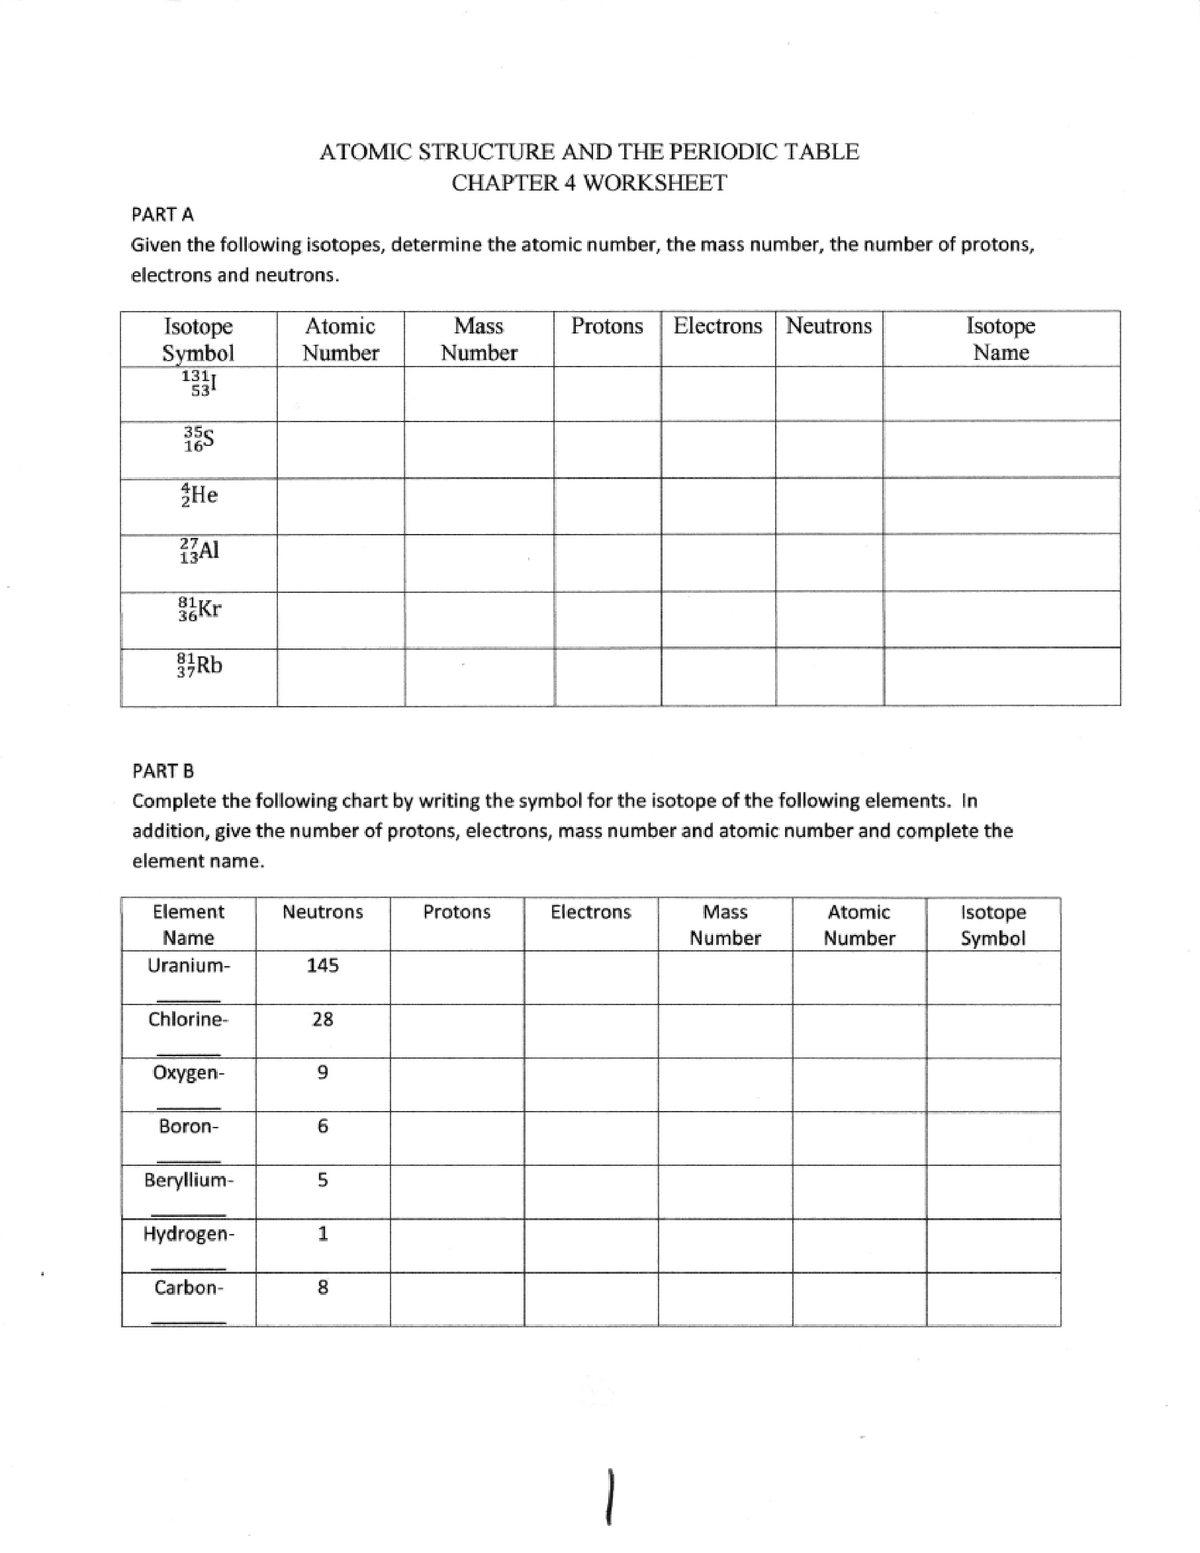 Isotope review packet - ATOMIC STRUCTURE AND THE PERIODIC TABLE With Atomic Structure Practice Worksheet Answers